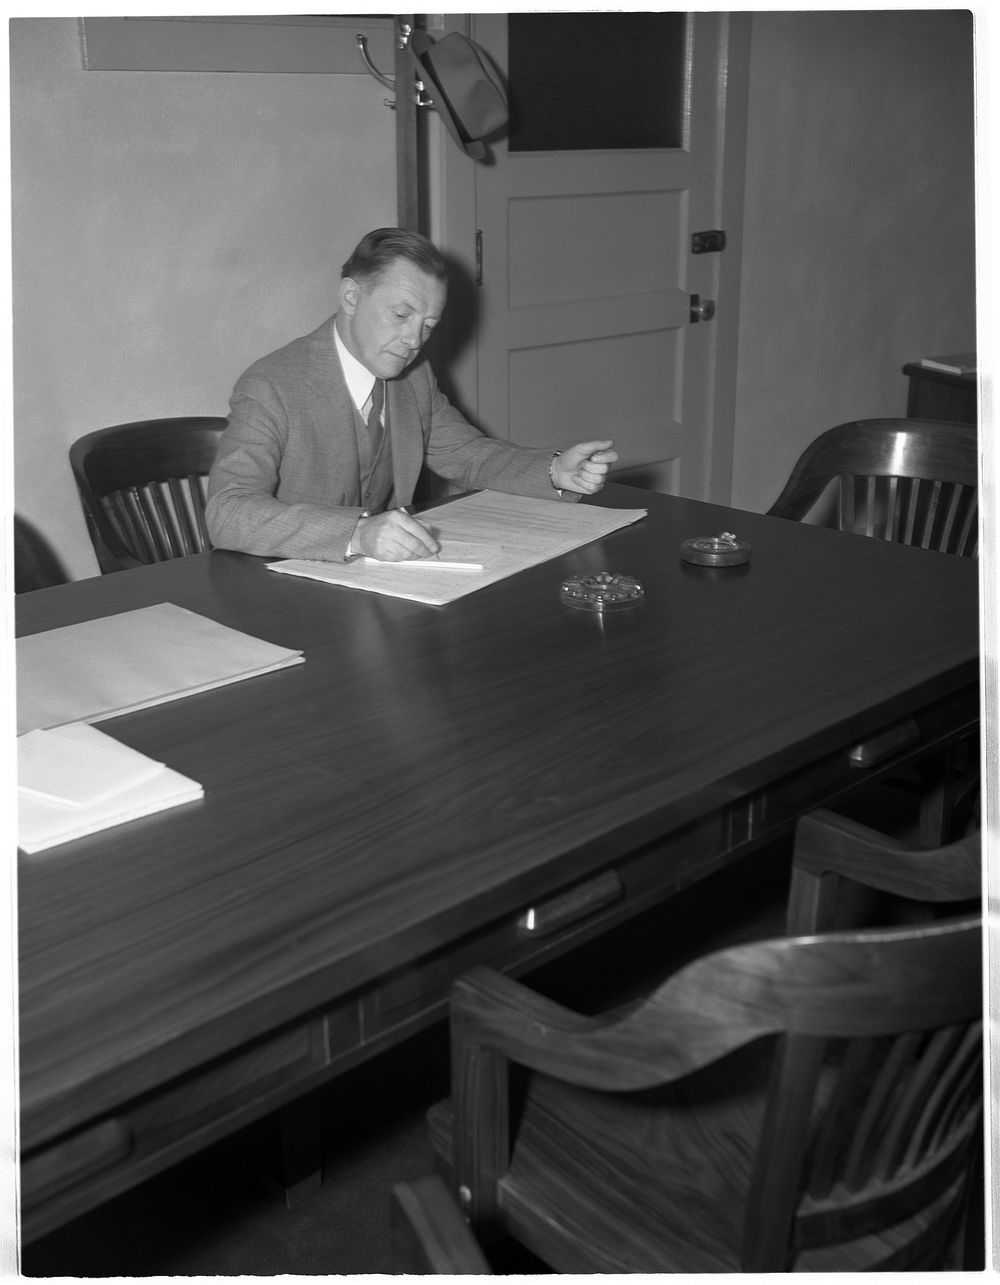 L.W. Smith, assistant consultant, Lumber and Timber Products Unit. Sourced from the Library of Congress.